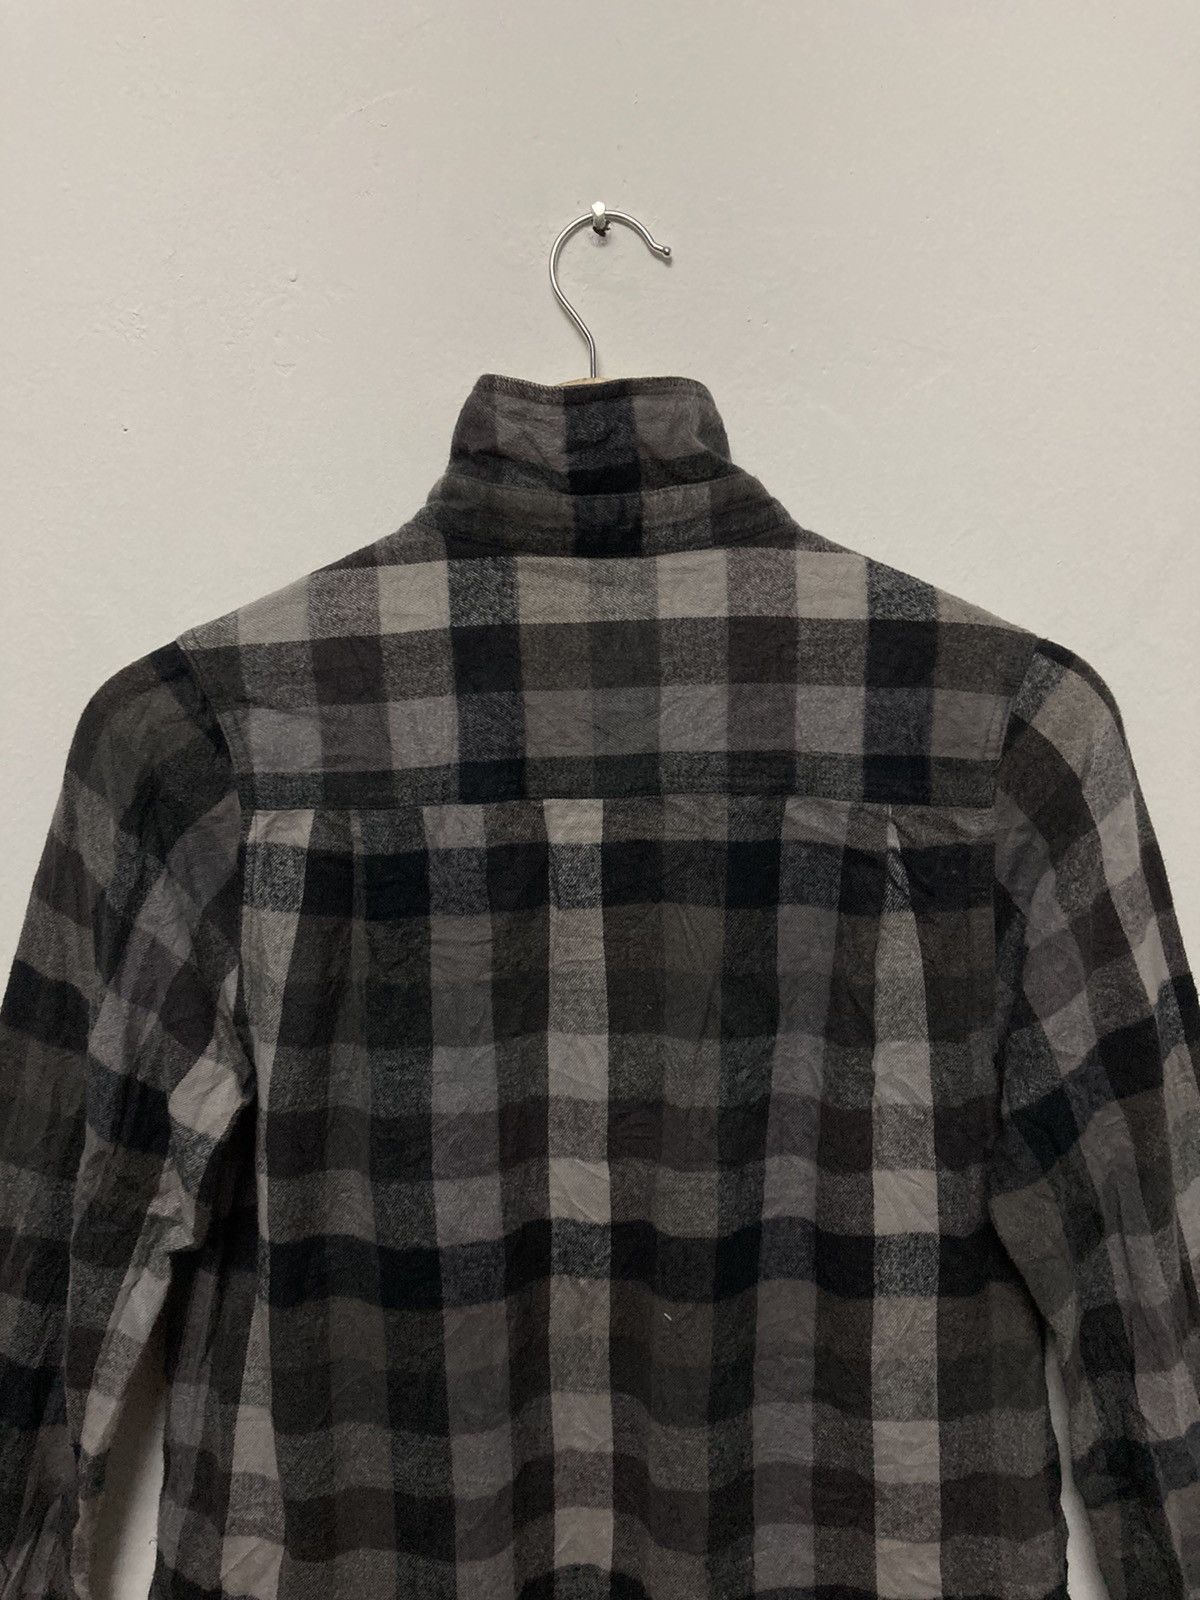 Bape Button Up Checker Flannel Shirt Made in Japan - 7